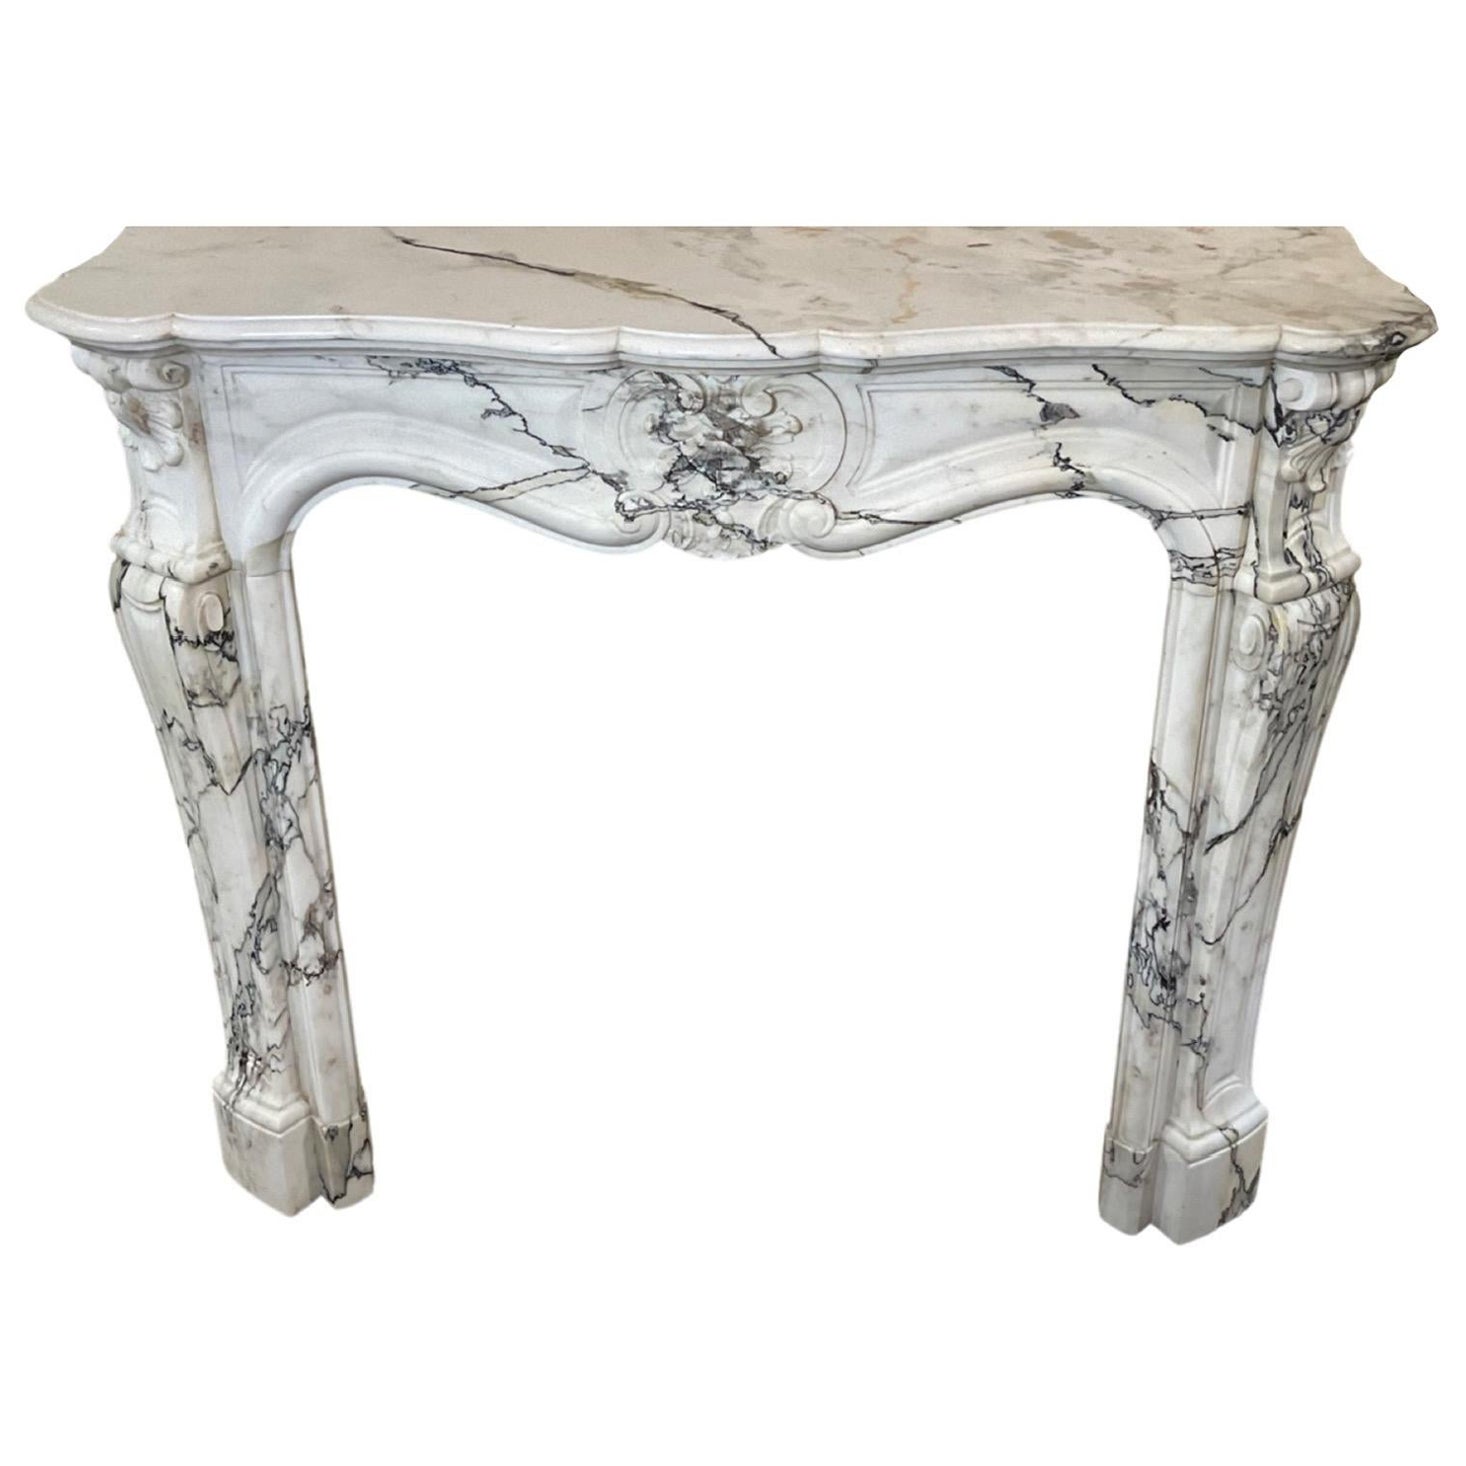 French White Marble Mantel For Sale